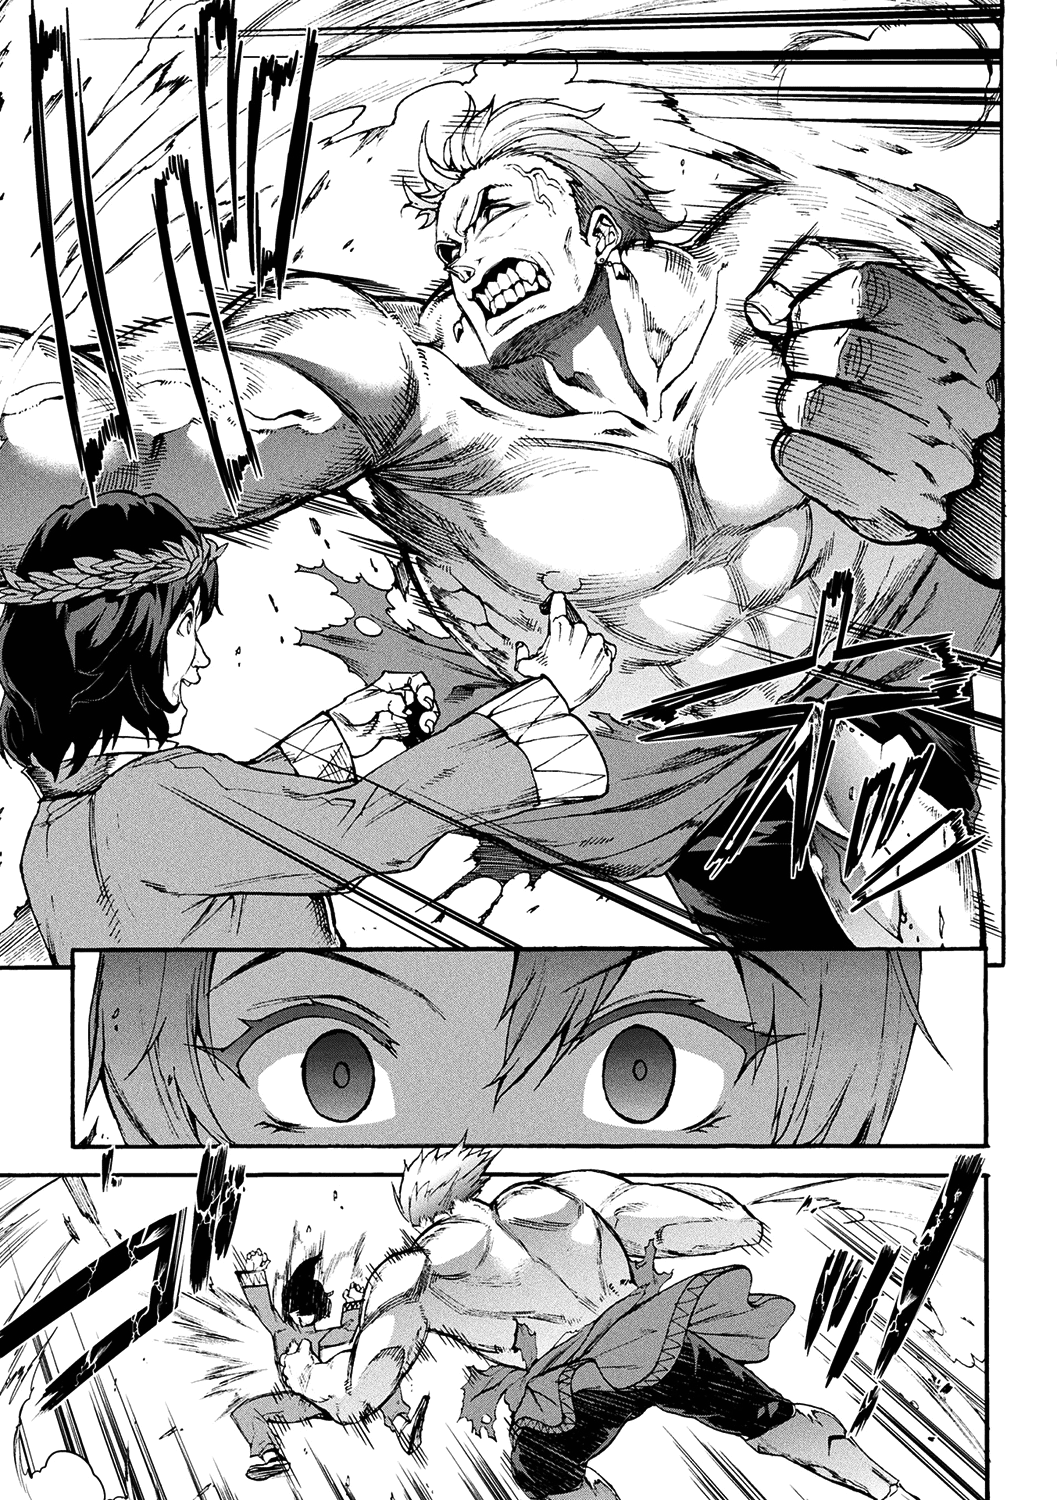 Raikou Shinki Igis Magia -Pandra Saga 3Rd Ignition Vol.1 Chapter 7: Seventh Passage: God Of War Ares Appears! Aphrodite's First Love!? - Picture 3